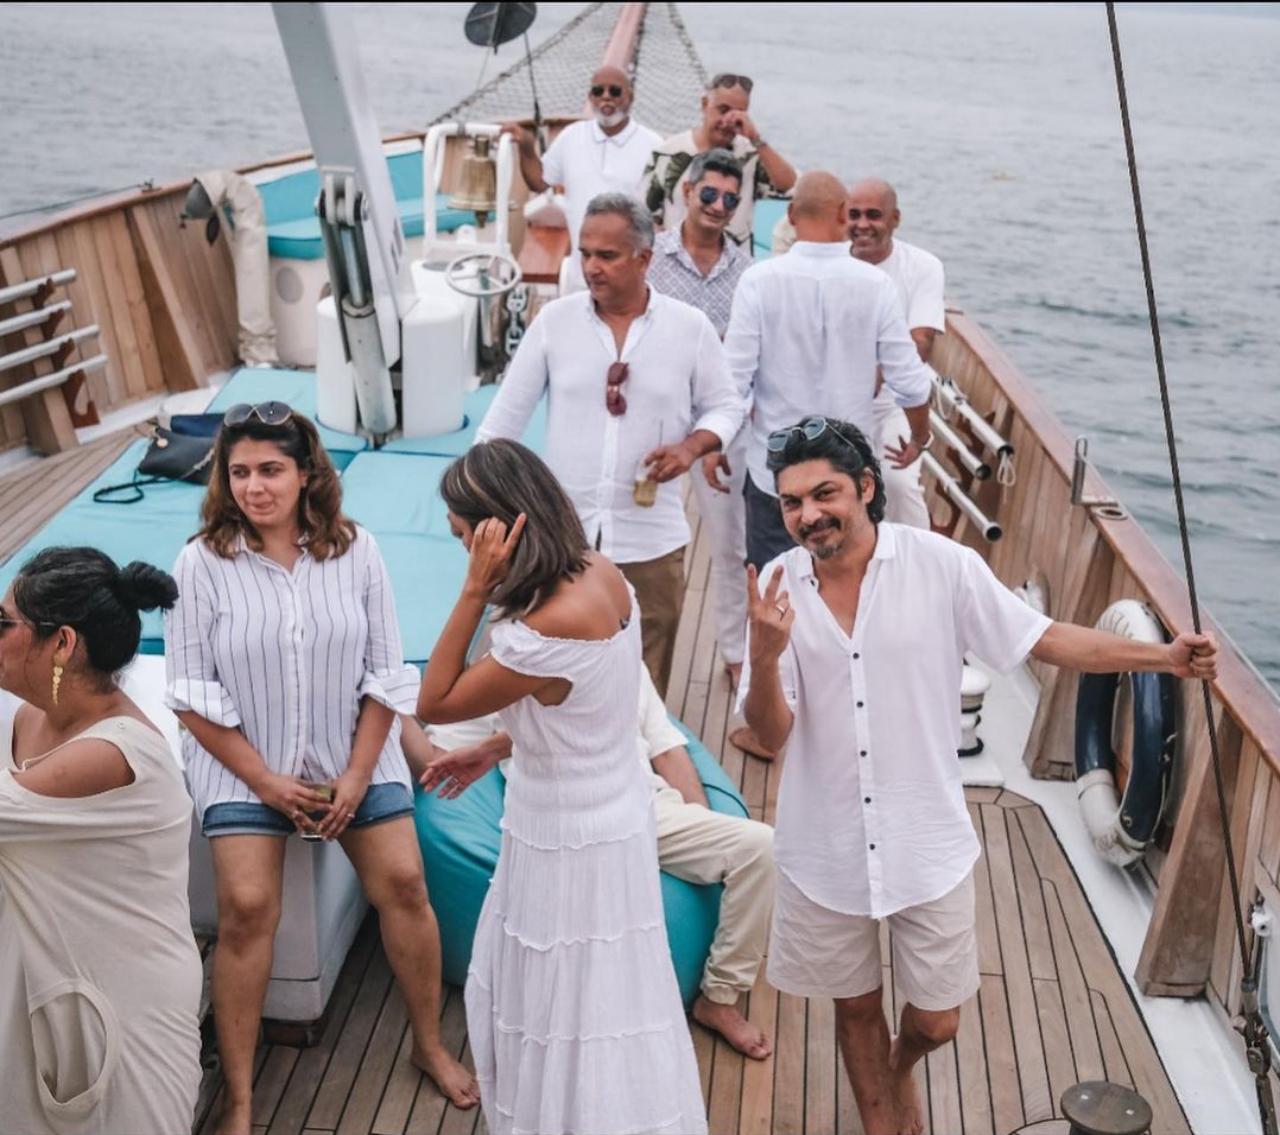 Demetriades shared some stunning inside pictures from the yacht party. They had a white-themed part and looks like they all had a blast 